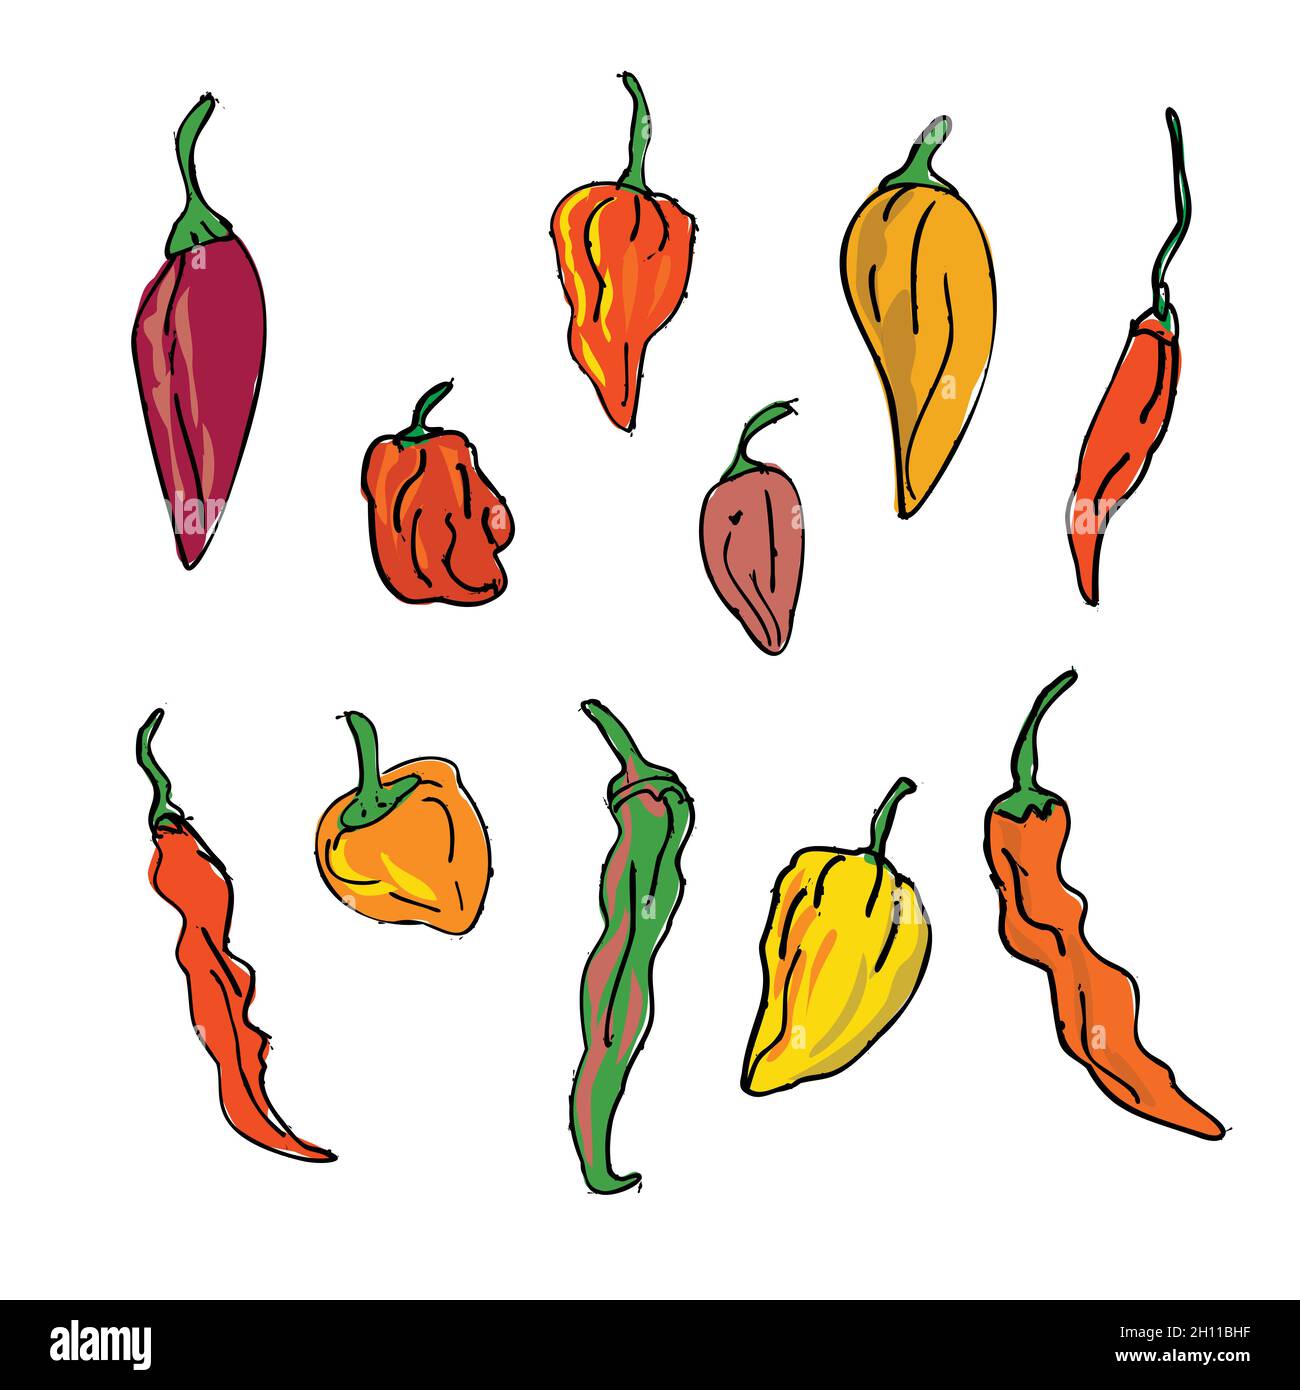 Collection or Set of Different Hot Chili Peppers Drawing Stock Photo